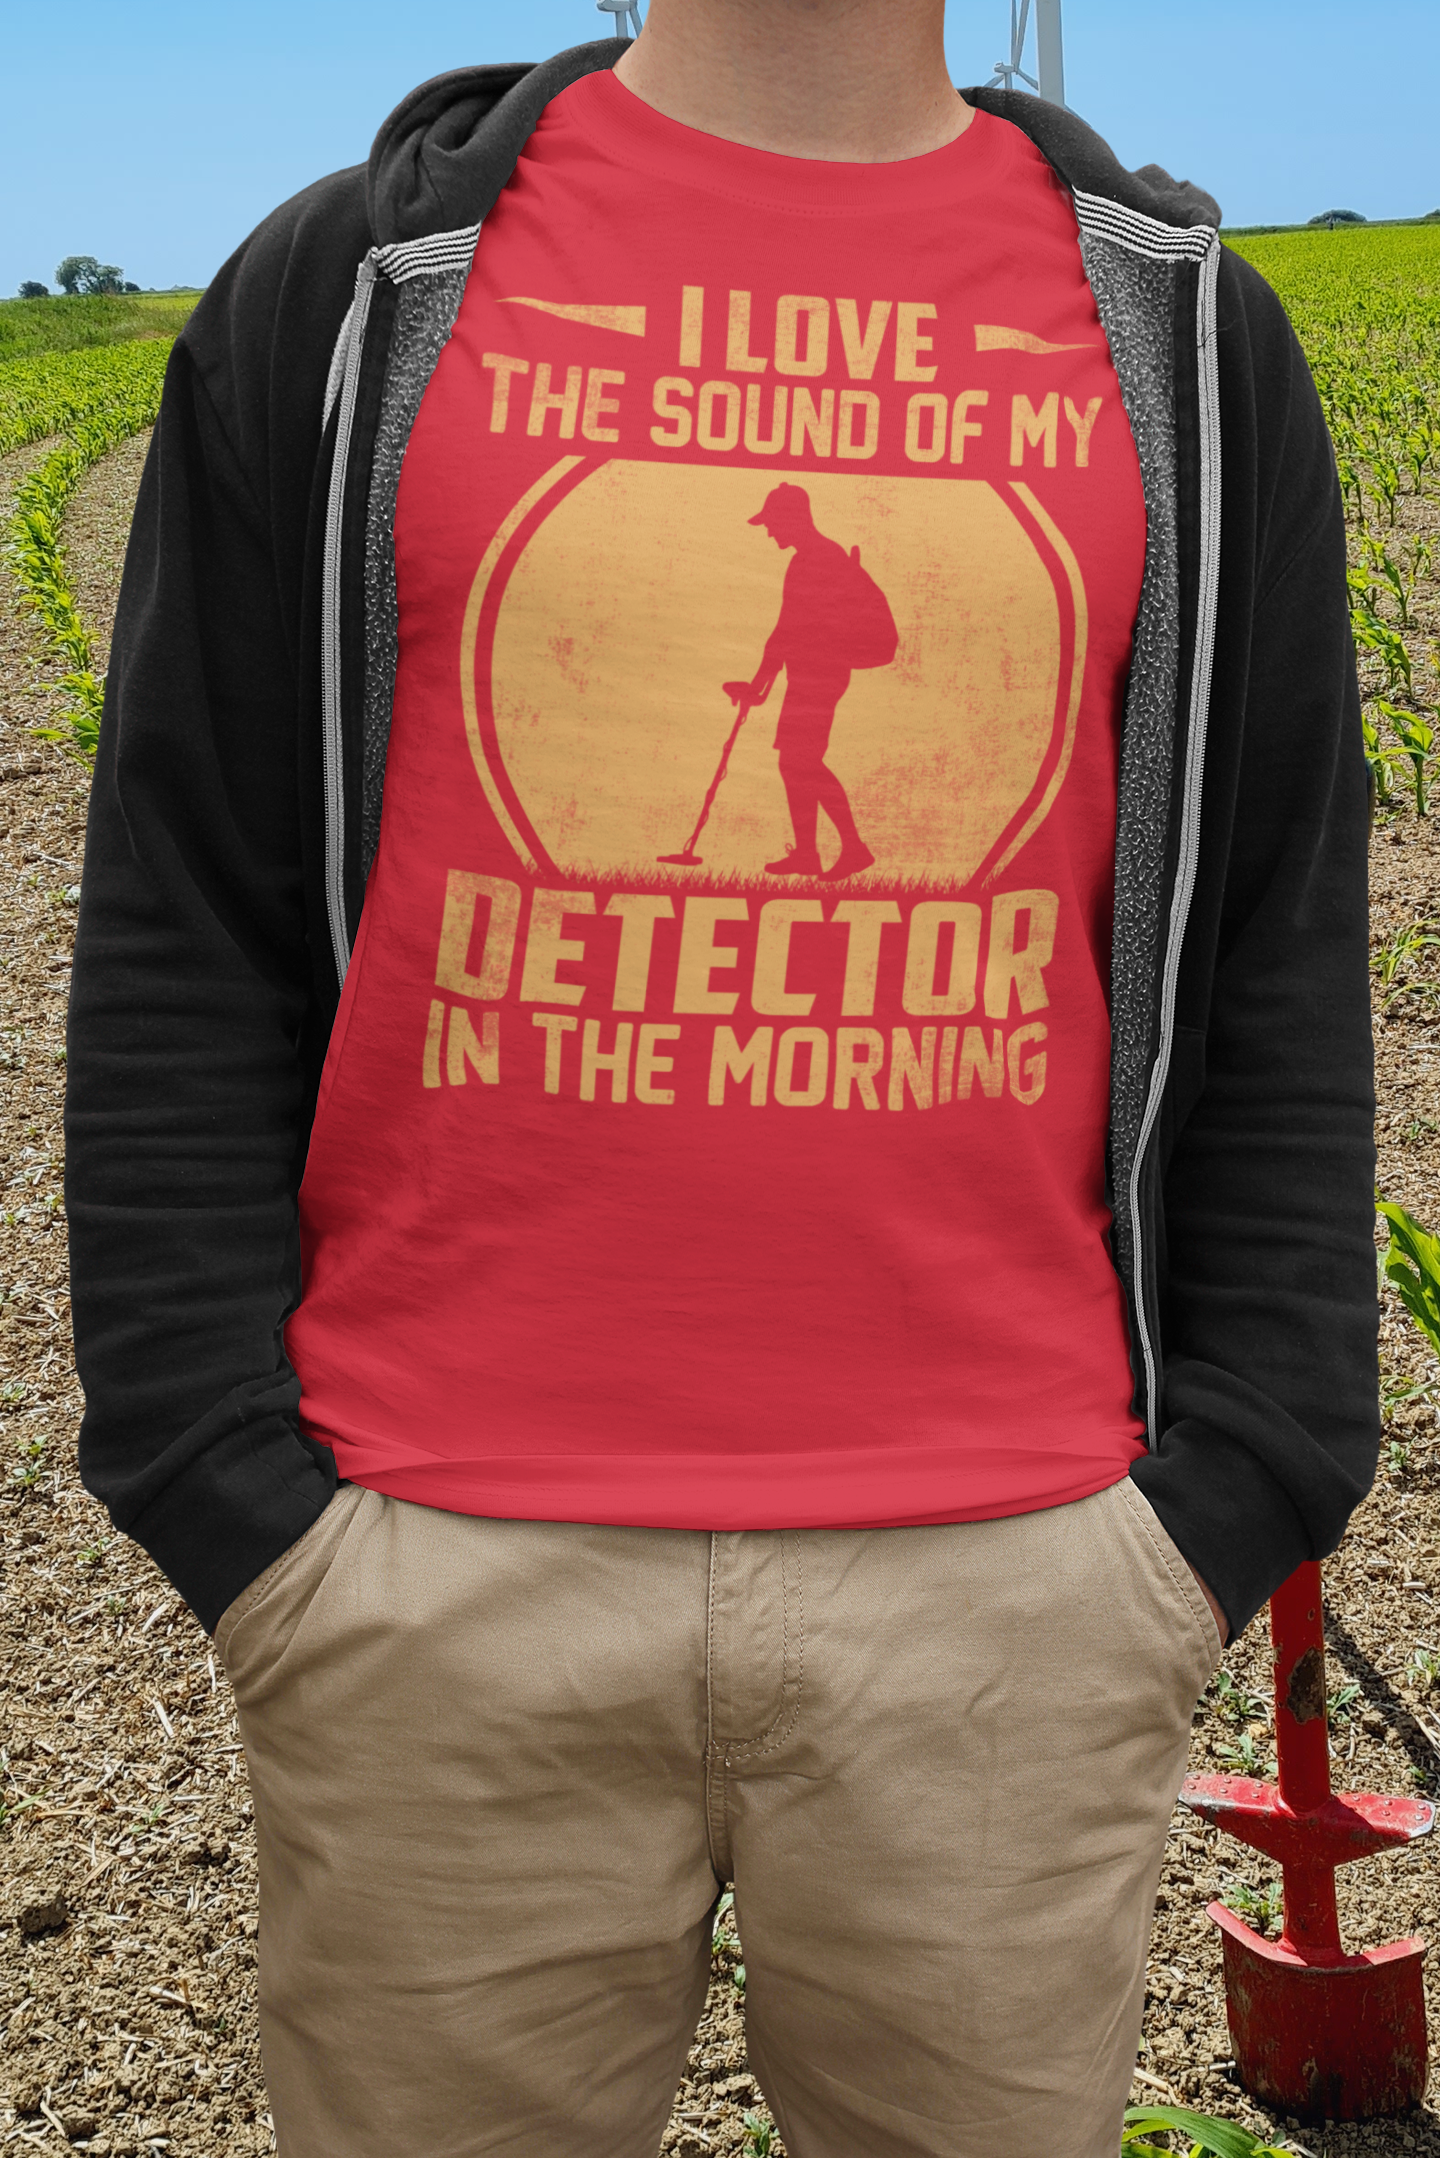 I love the sound of my metal detector in the morning T-shirt